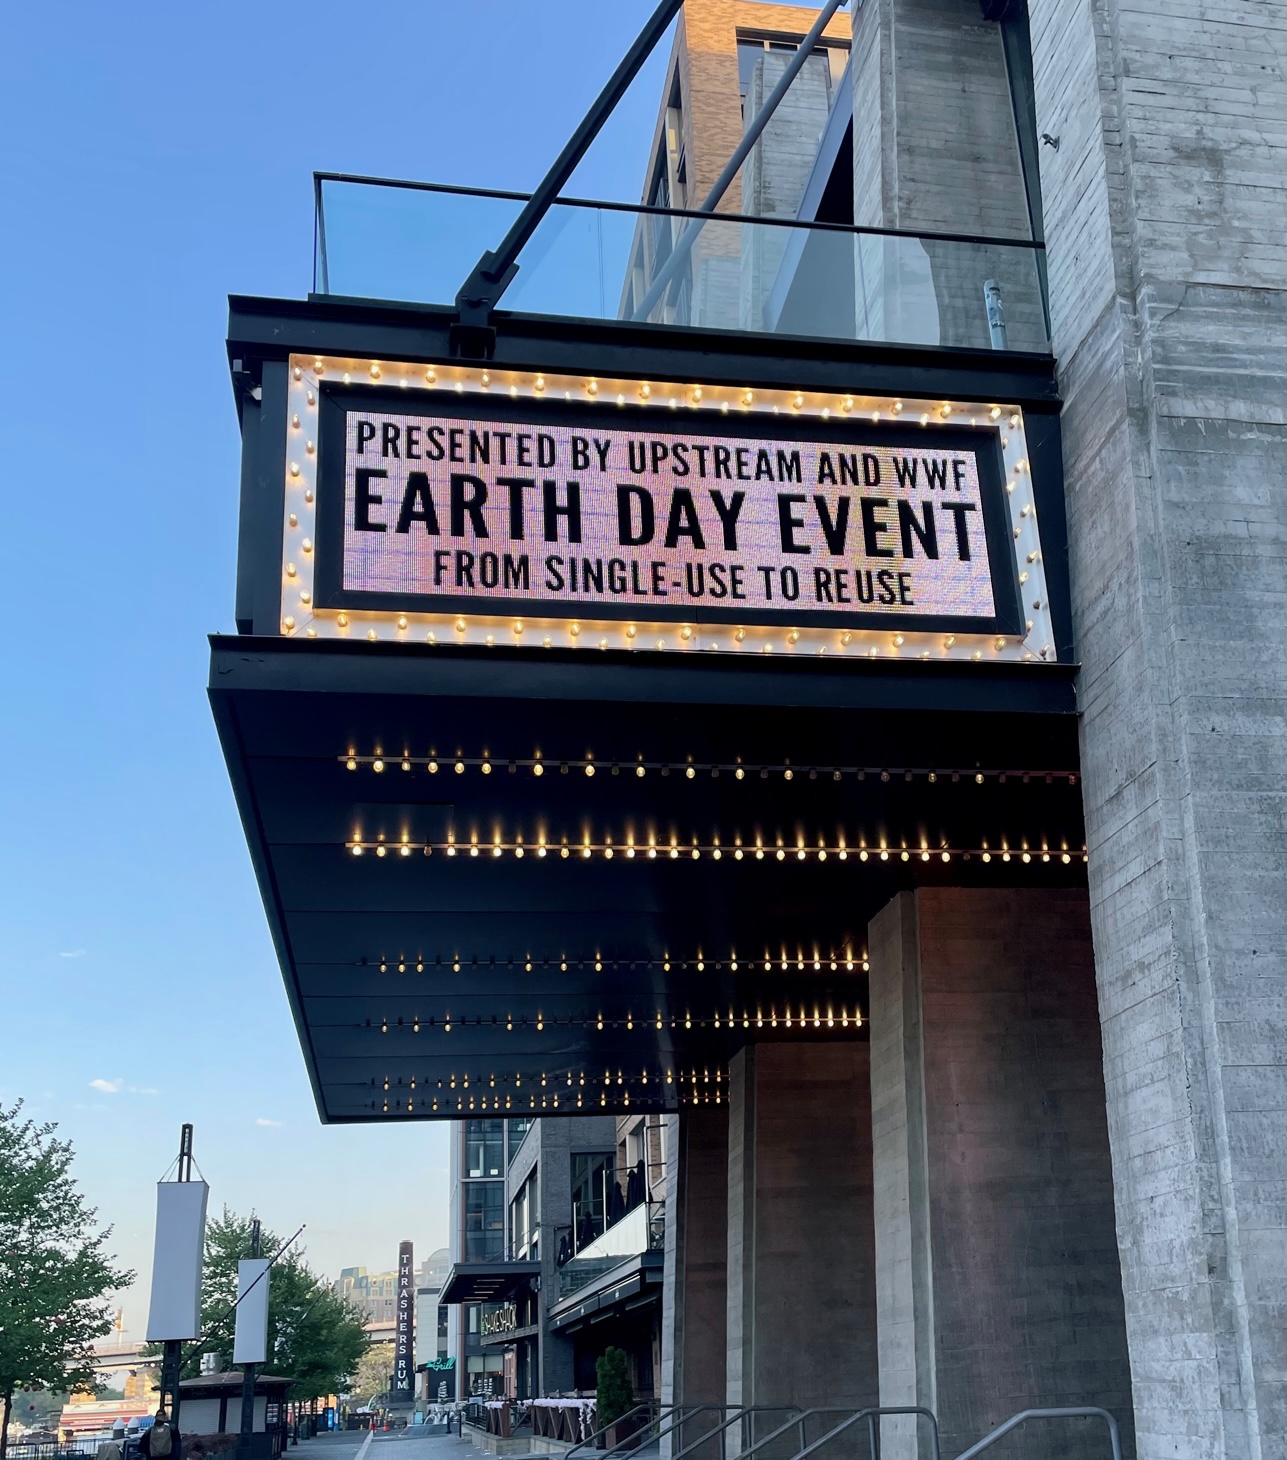 An event sign that says "Earth Day Event."